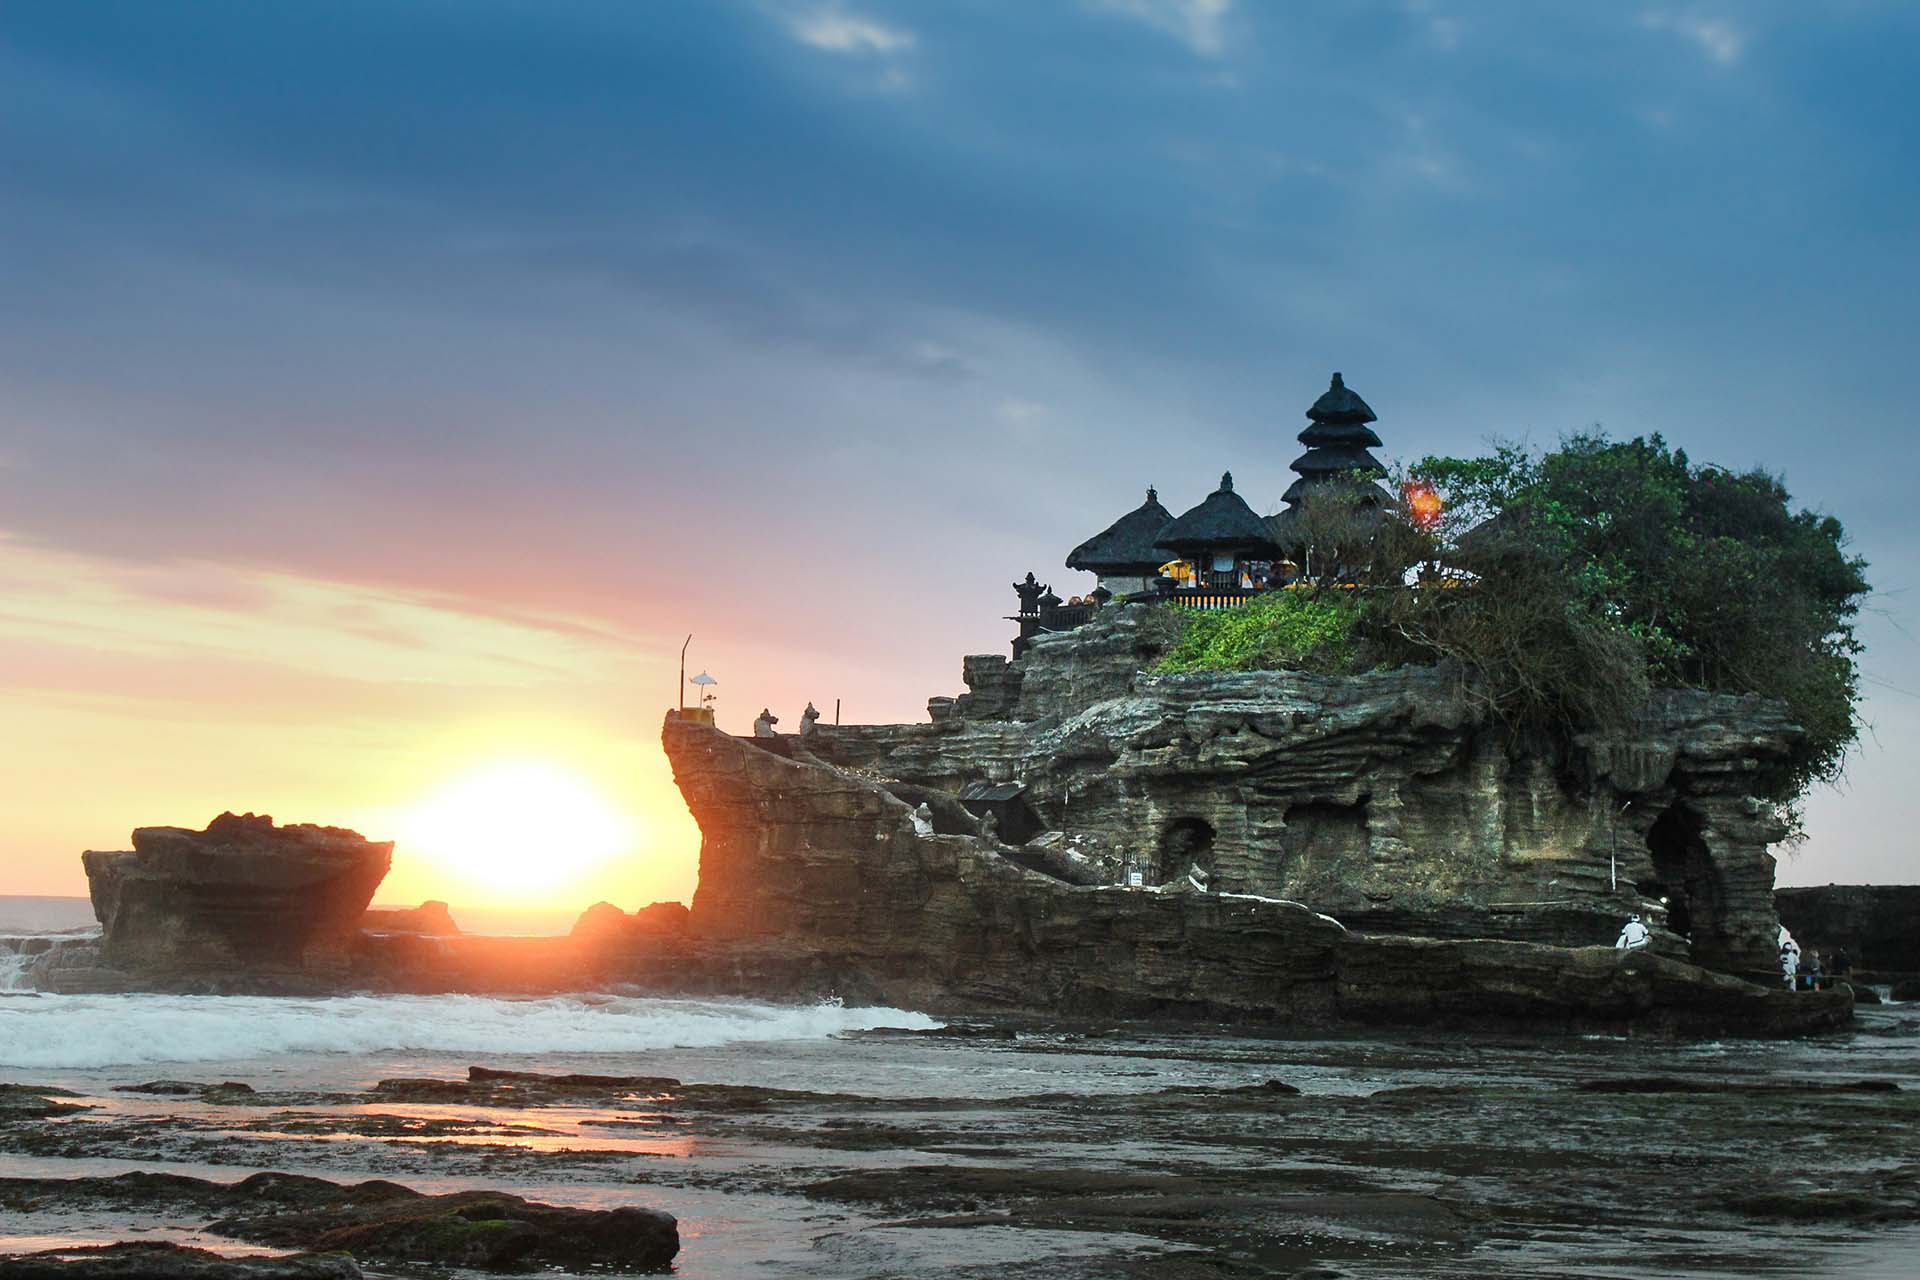 View of Bali and a gray rock hill